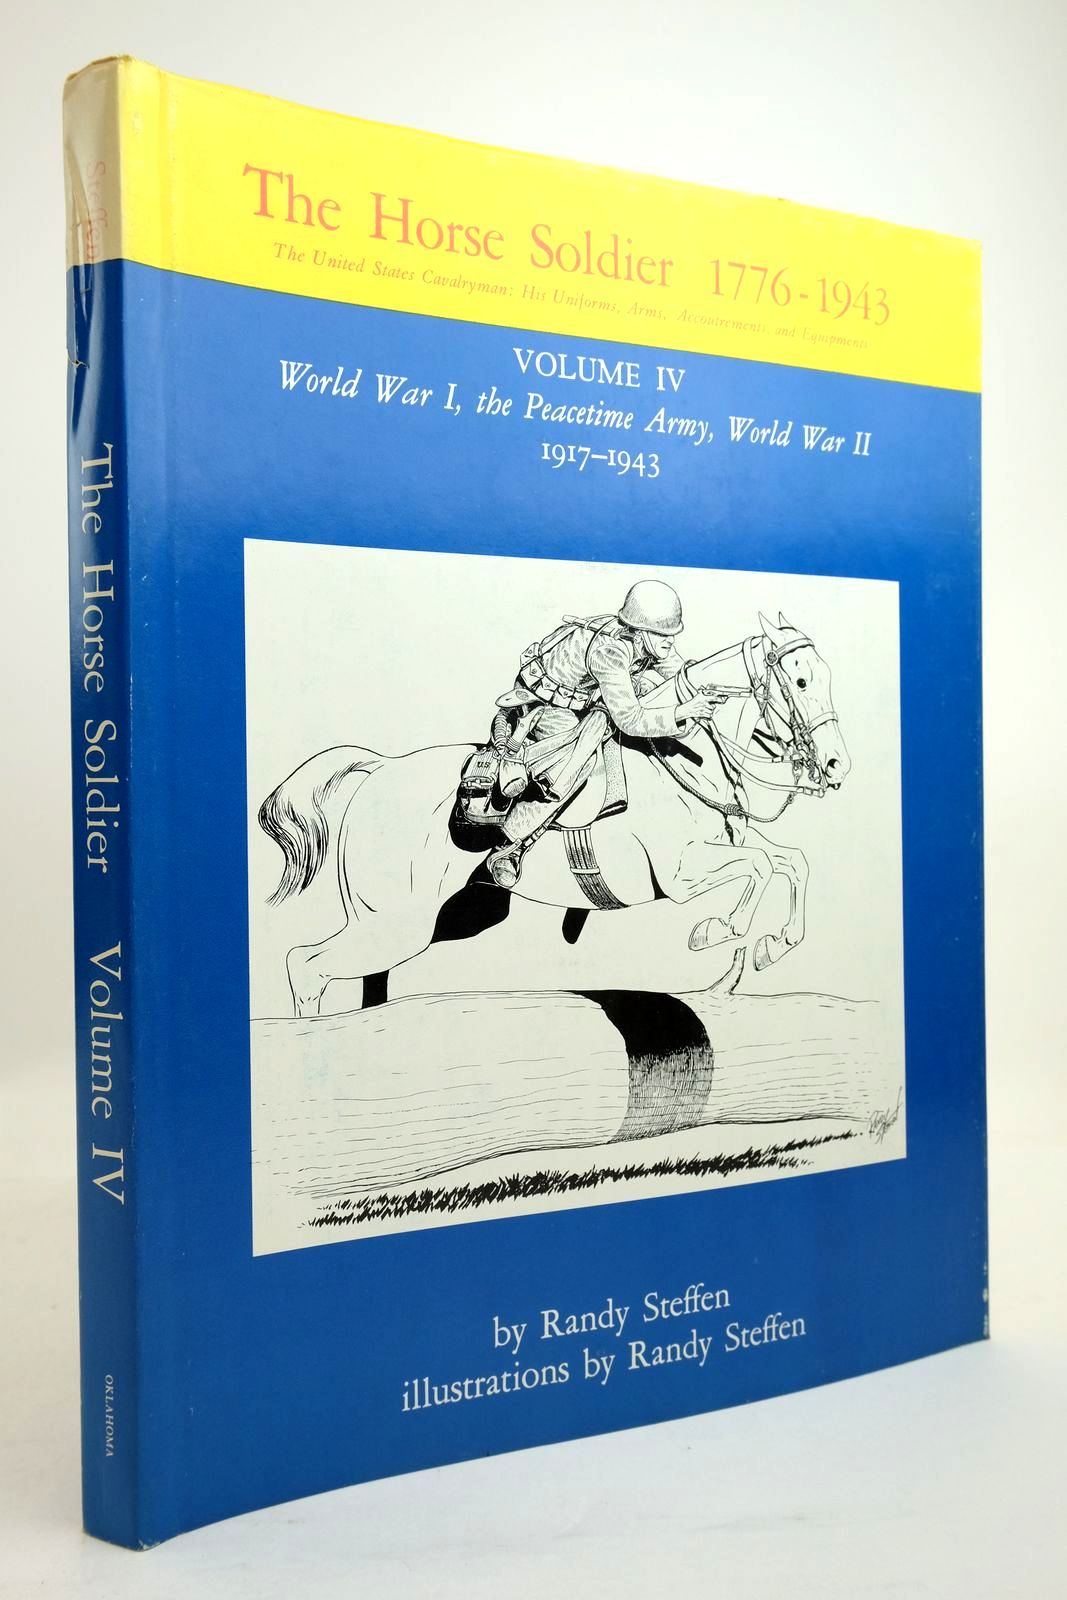 Photo of THE HORSE SOLDIER 1776-1943: VOLUME IV: WORLD WAR I, THE PEACETIME ARMY, WORLD WAR II 1917-1943 written by Steffen, Randy illustrated by Steffen, Randy published by University of Oklahoma Press (STOCK CODE: 2134516)  for sale by Stella & Rose's Books